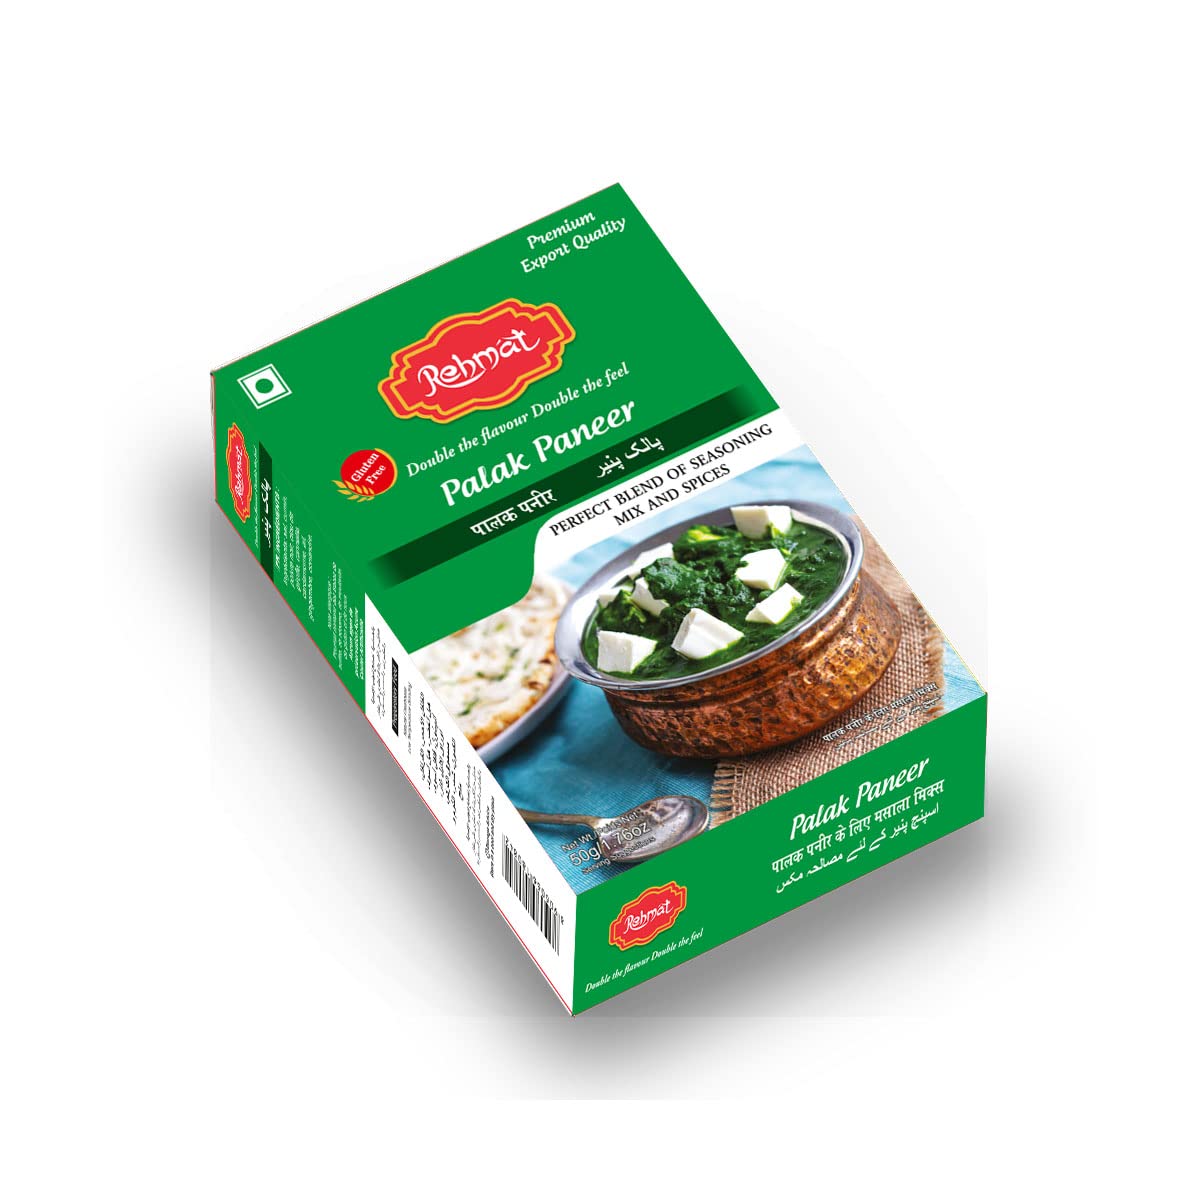 Rehmat Palak Paneer Masala Powder, Perfect for Cooking Spices with Rich & Strong Flavour, Ready to Use, No added colours & Preservative, 50 gm (Pack of 4)